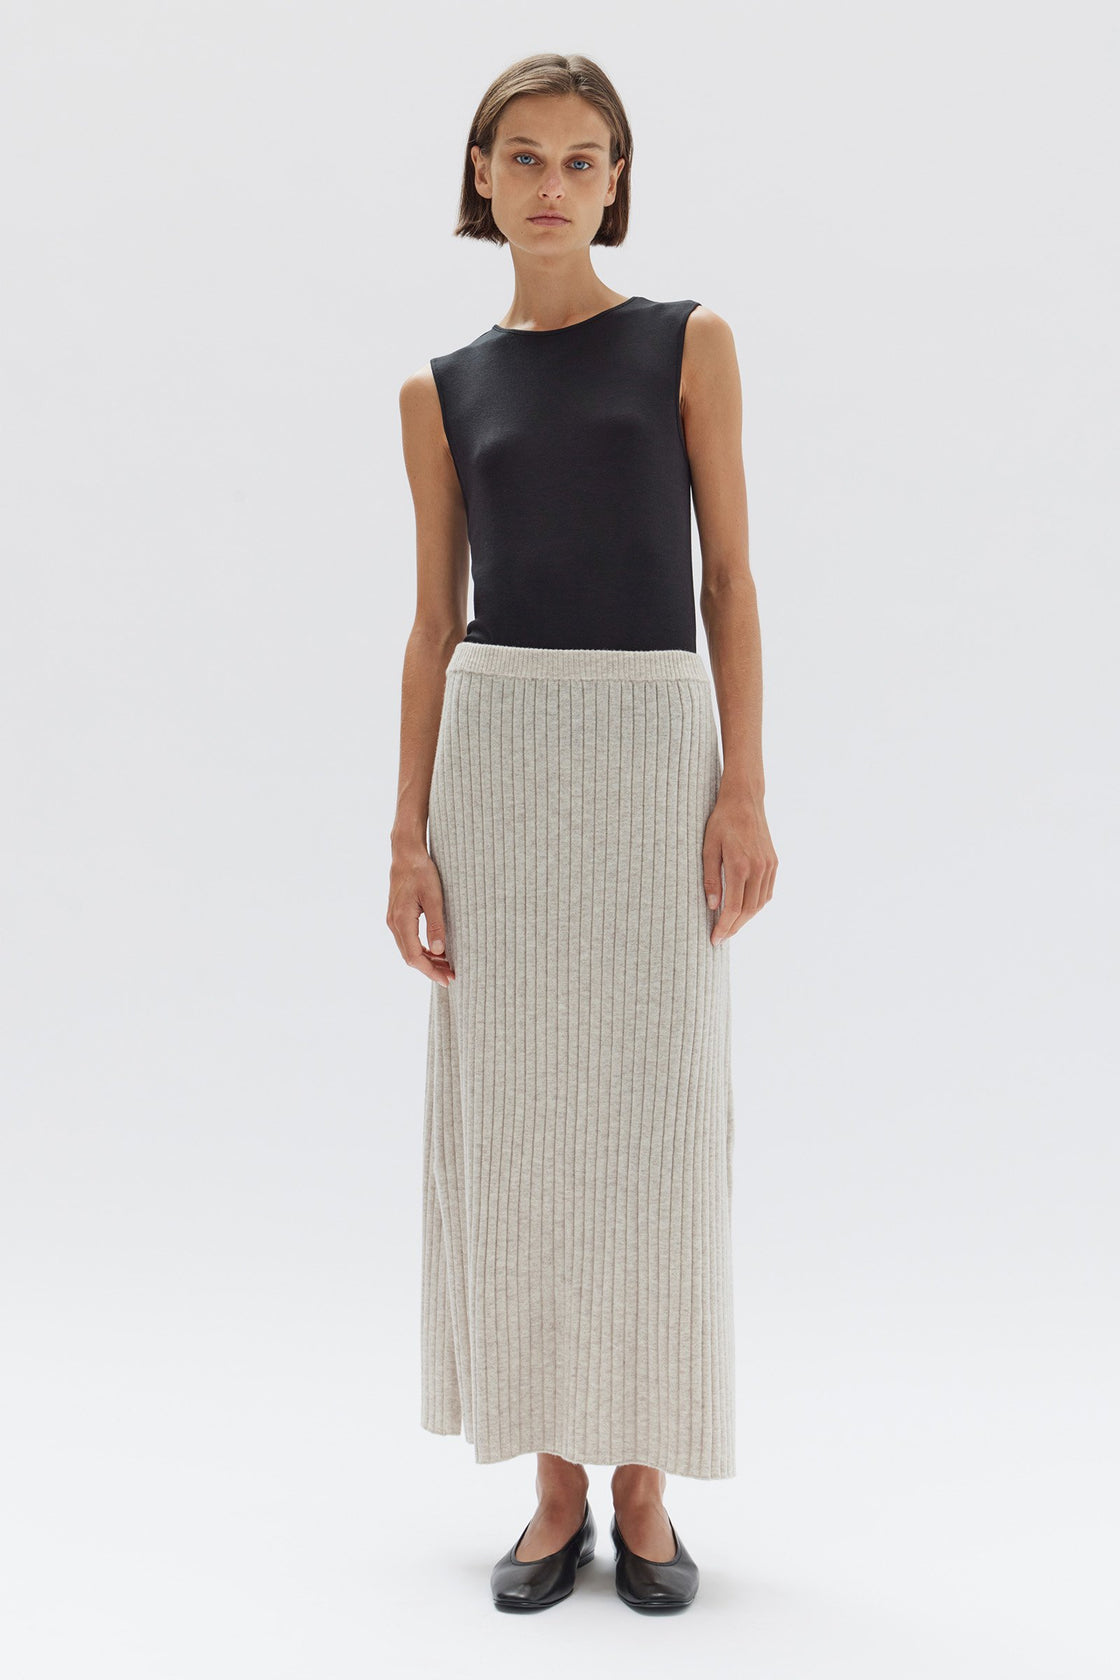 Assembly Label Wool Cashmere Skirt